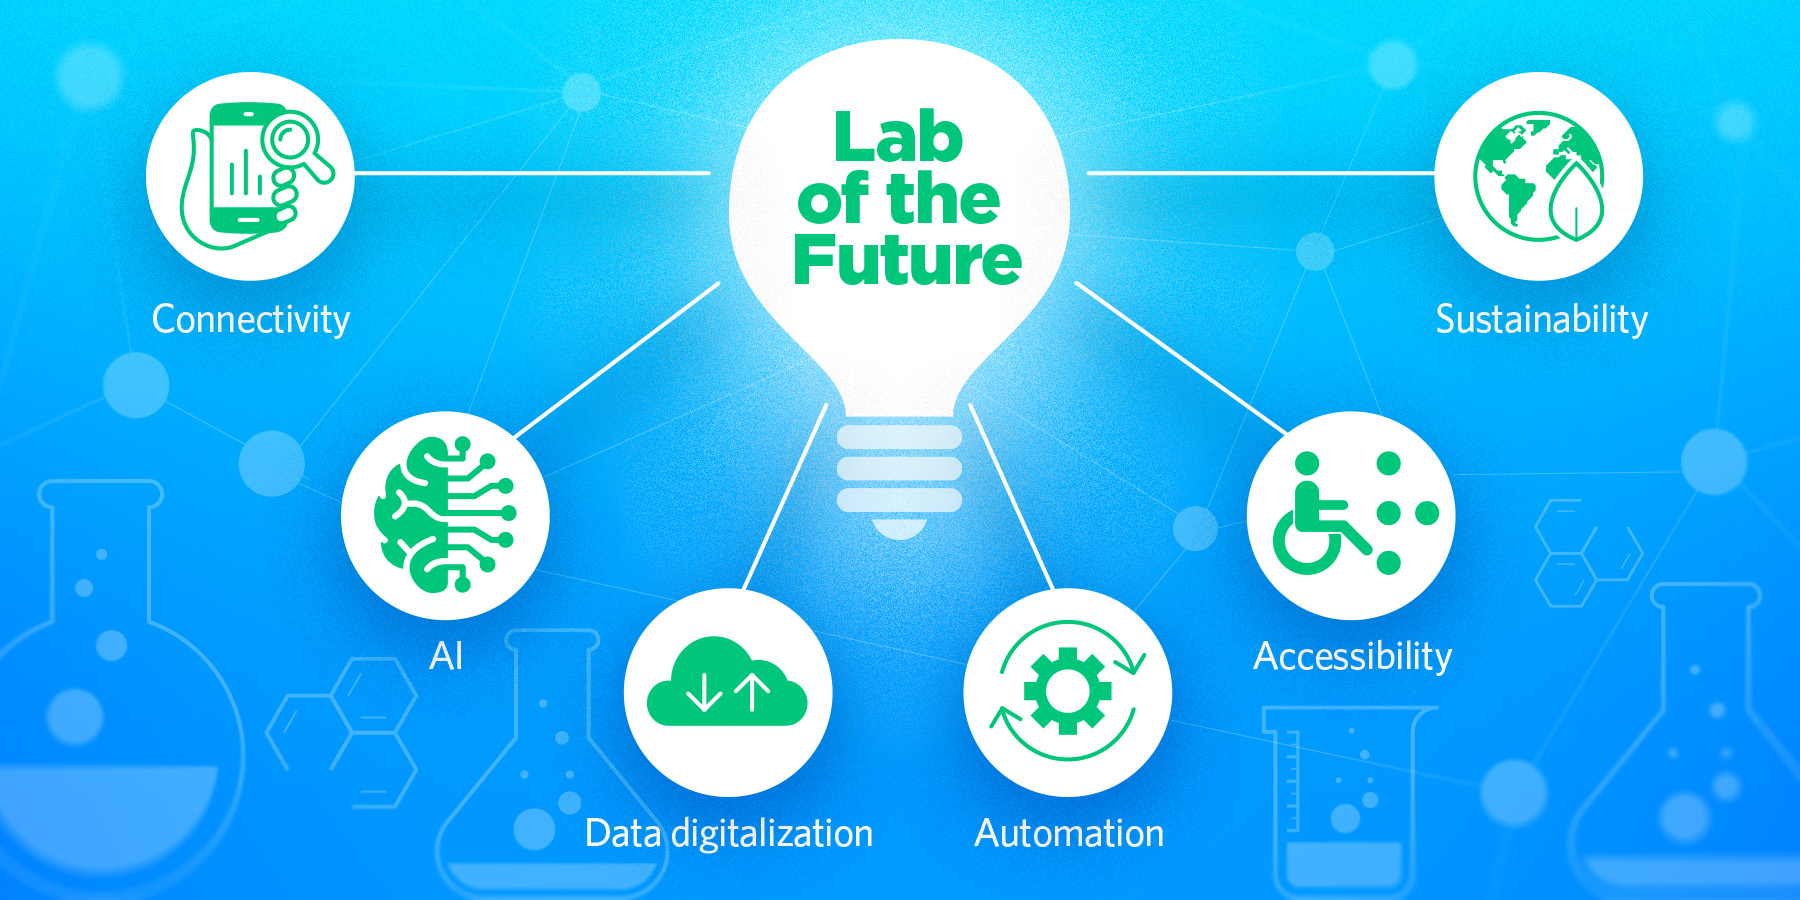 Infographic describing the lab of the future, showing a central light bulb and icons representing connectivity, artificial intelligence, data digitalization, automation, accessibility, and sustainability.